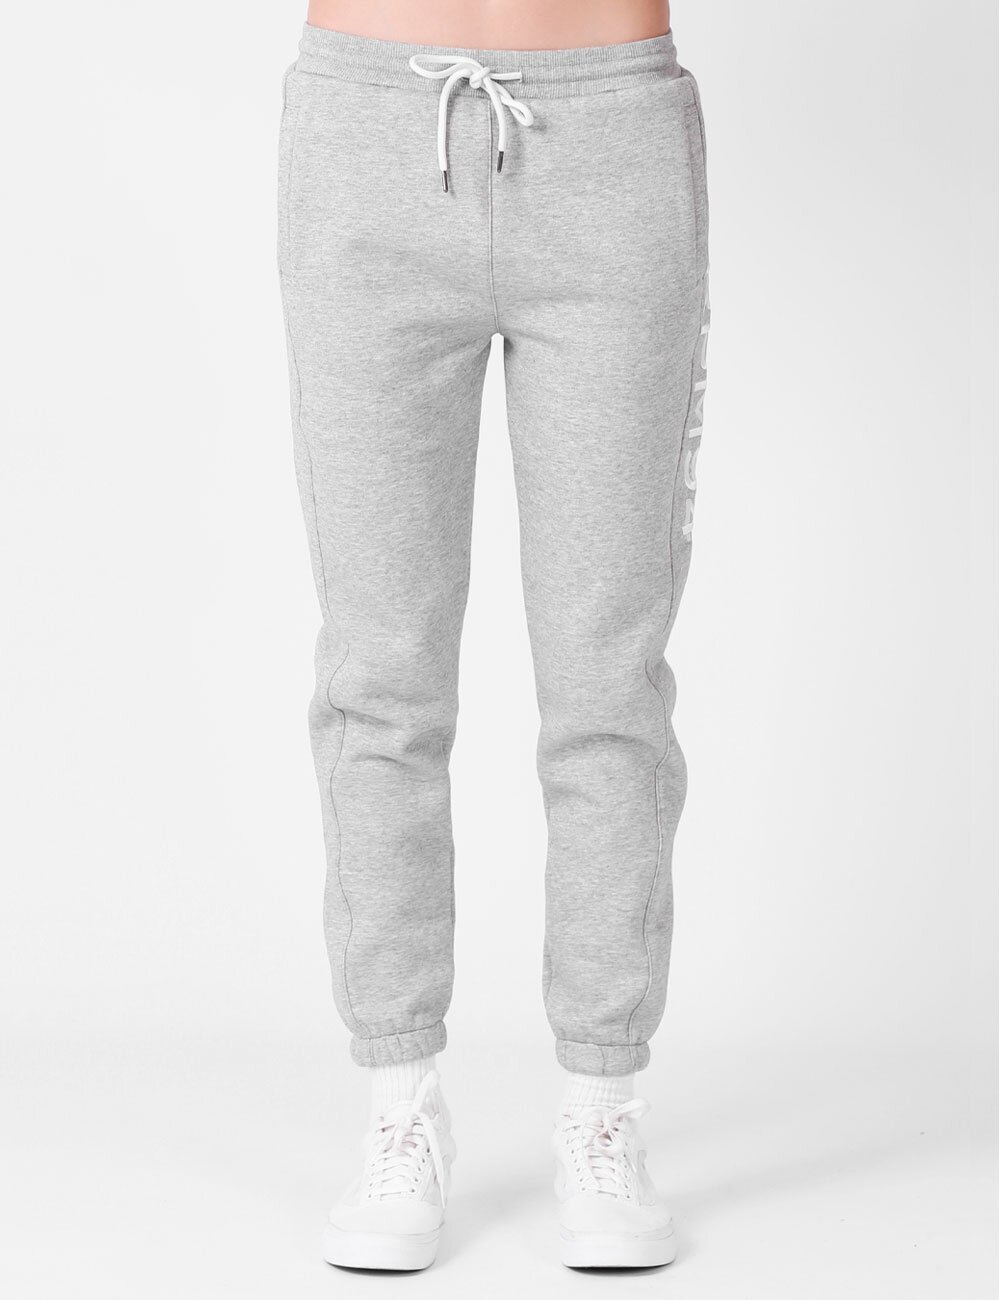 BLOCK TRACKY - Shop Women's Bottoms - Free NZ Wide Delivery Over $70 ...